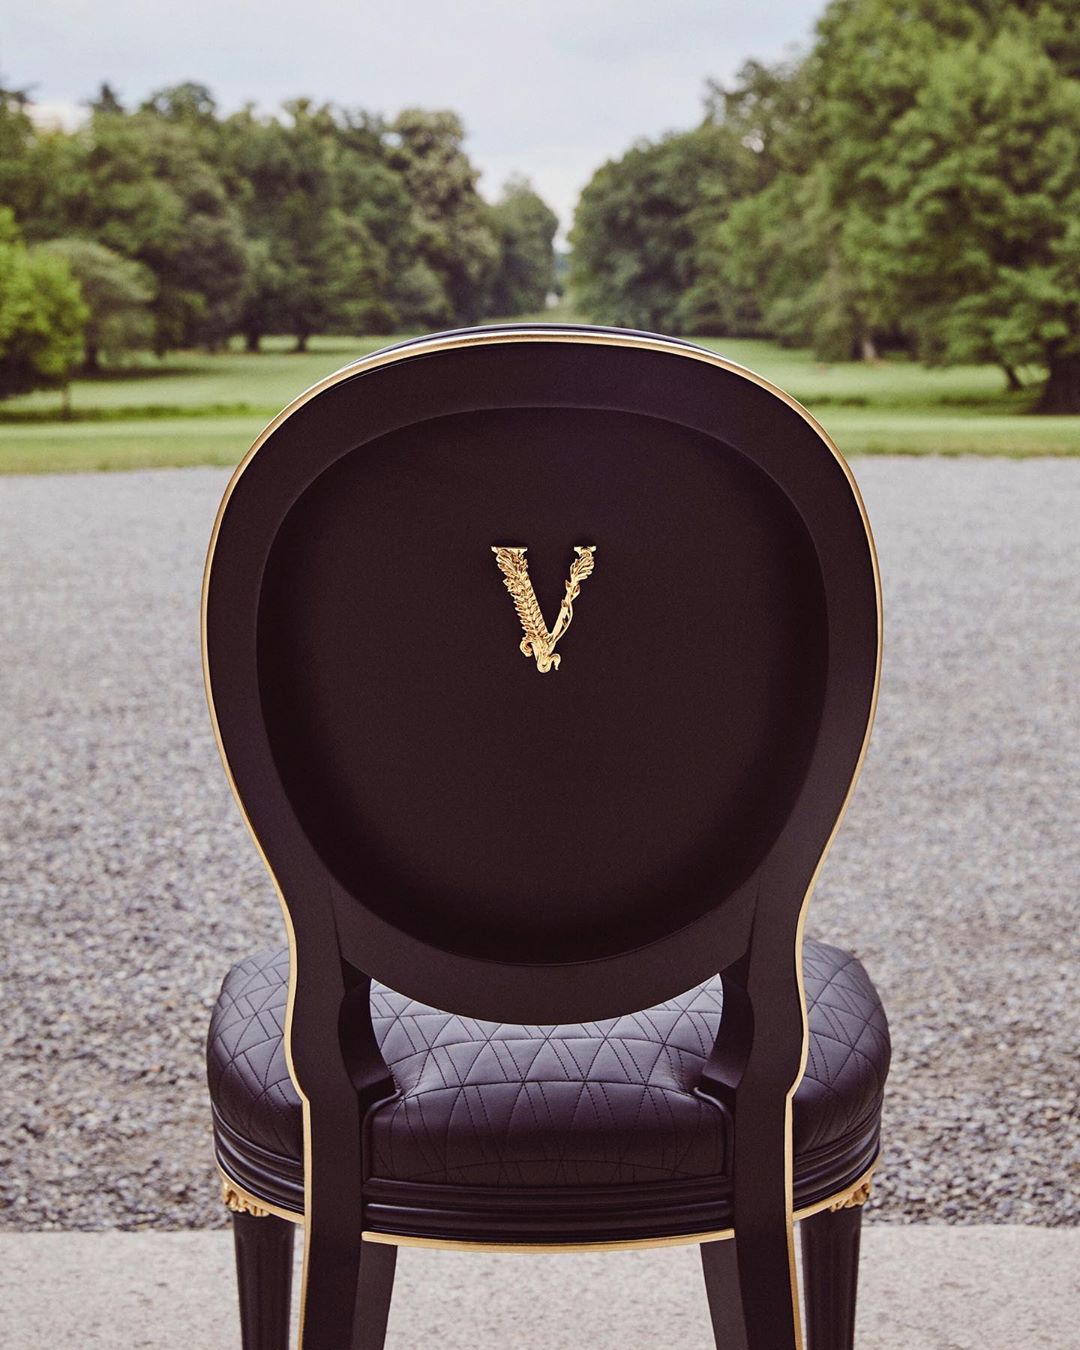 Versace - V for Virtus (and Versace) #AtHomeWithVersace #VersaceHome